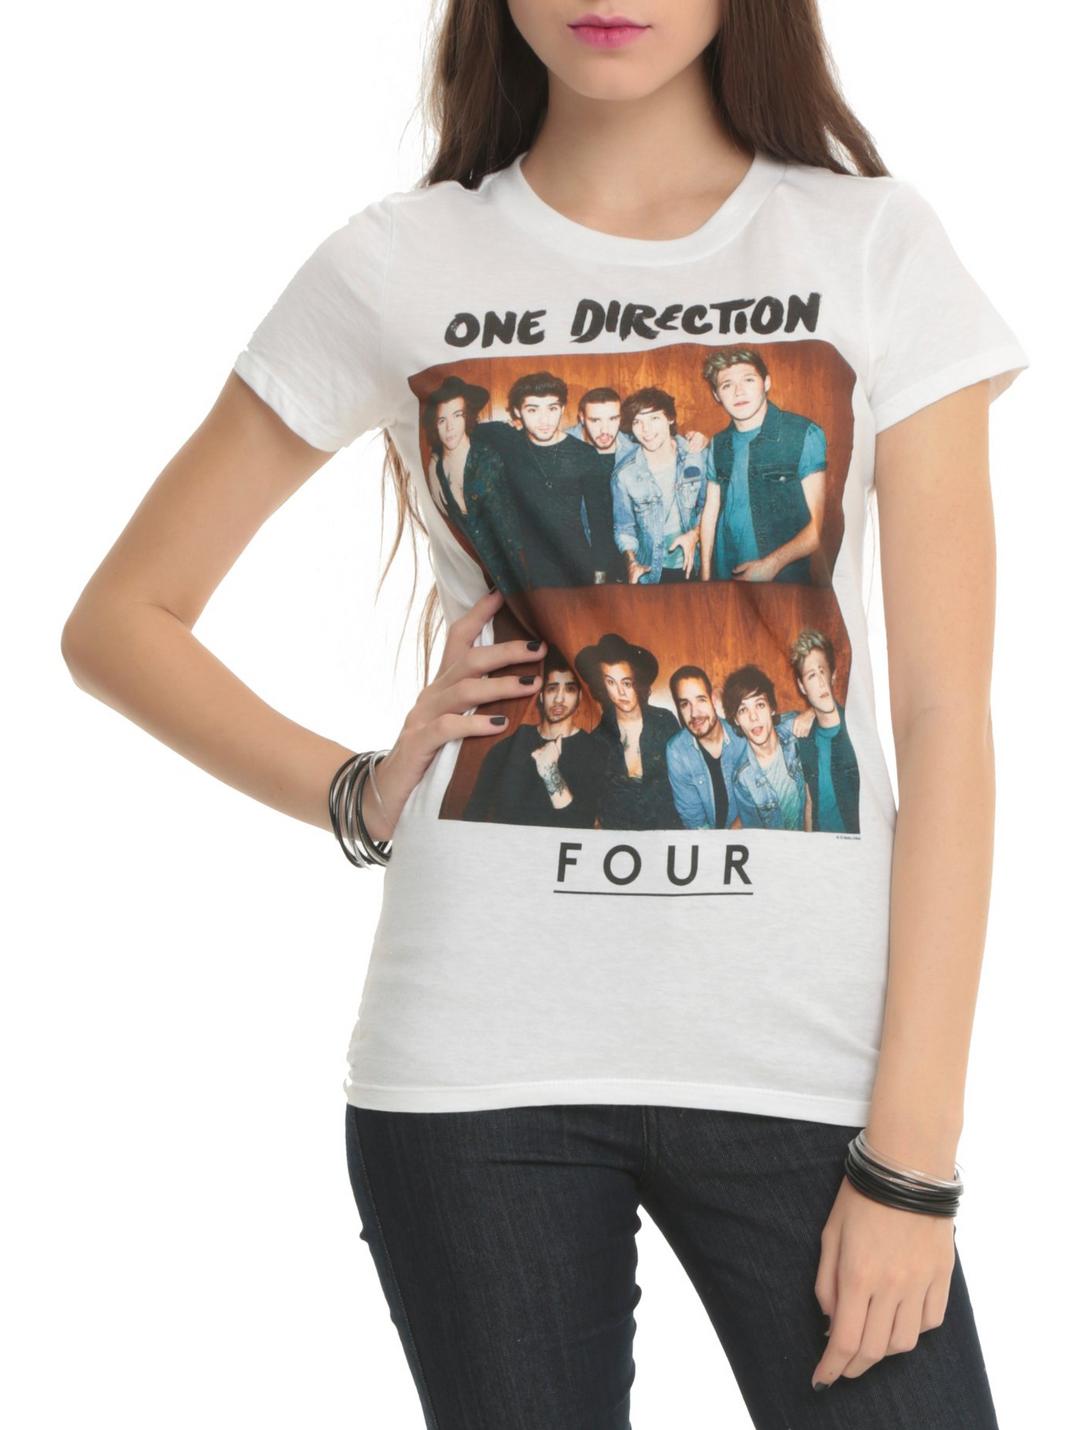 One Direction FOUR Girls T-Shirt, WHITE, hi-res